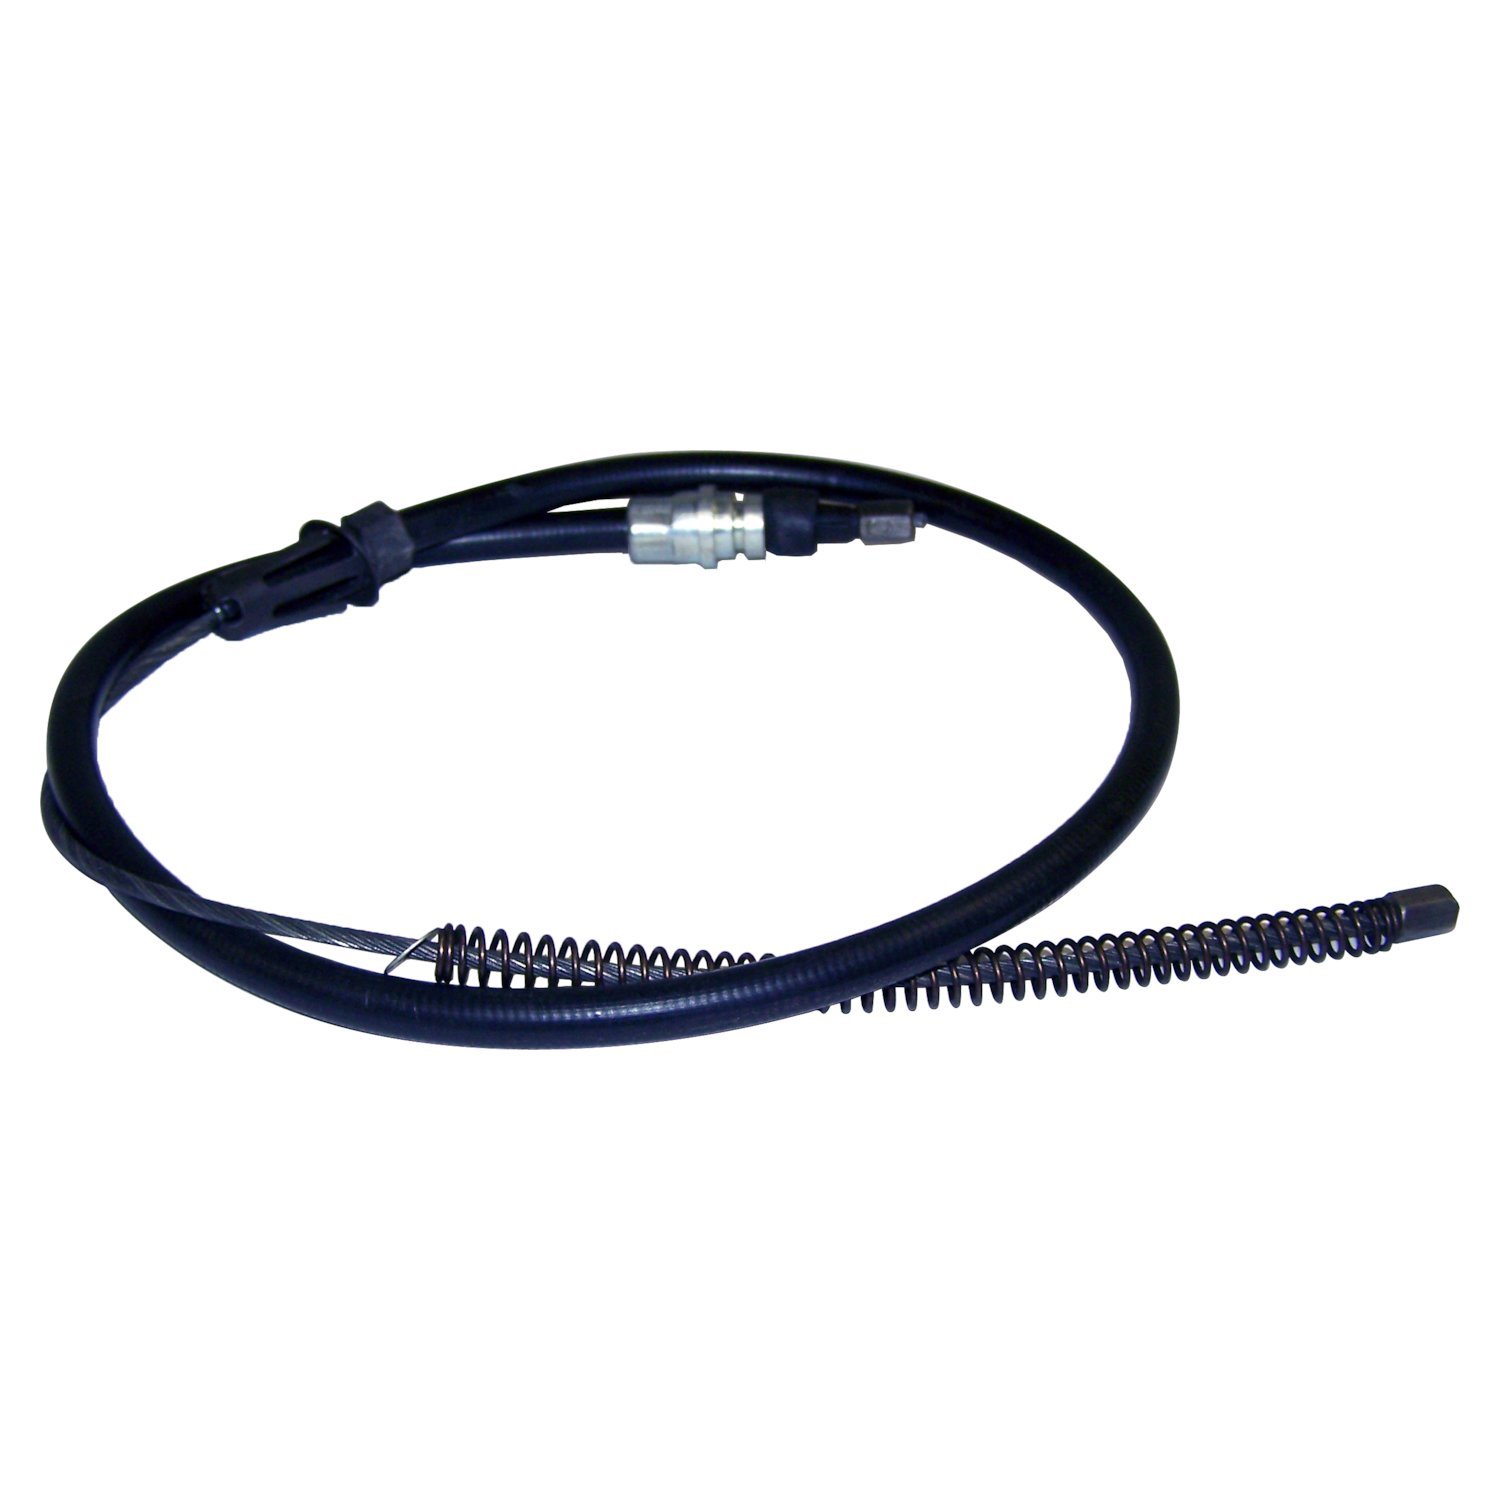 Left or Right Rear Parking Brake Cable for Misc. 1973 Jeep SJ, J-Series Models